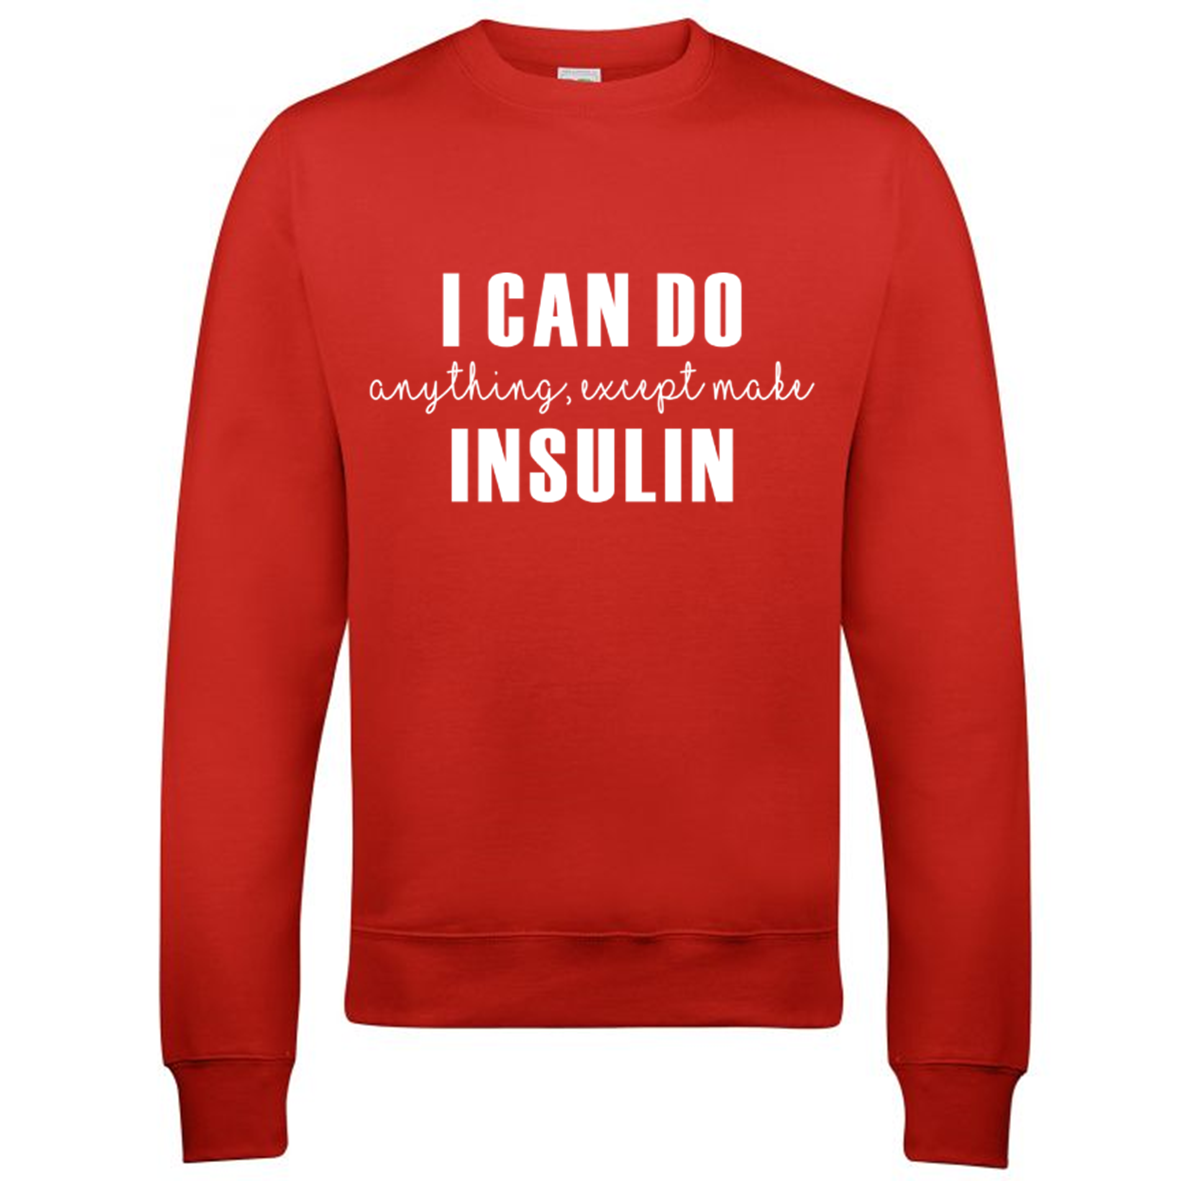 I Can Do Anything, Except Make Insulin Sweatshirt